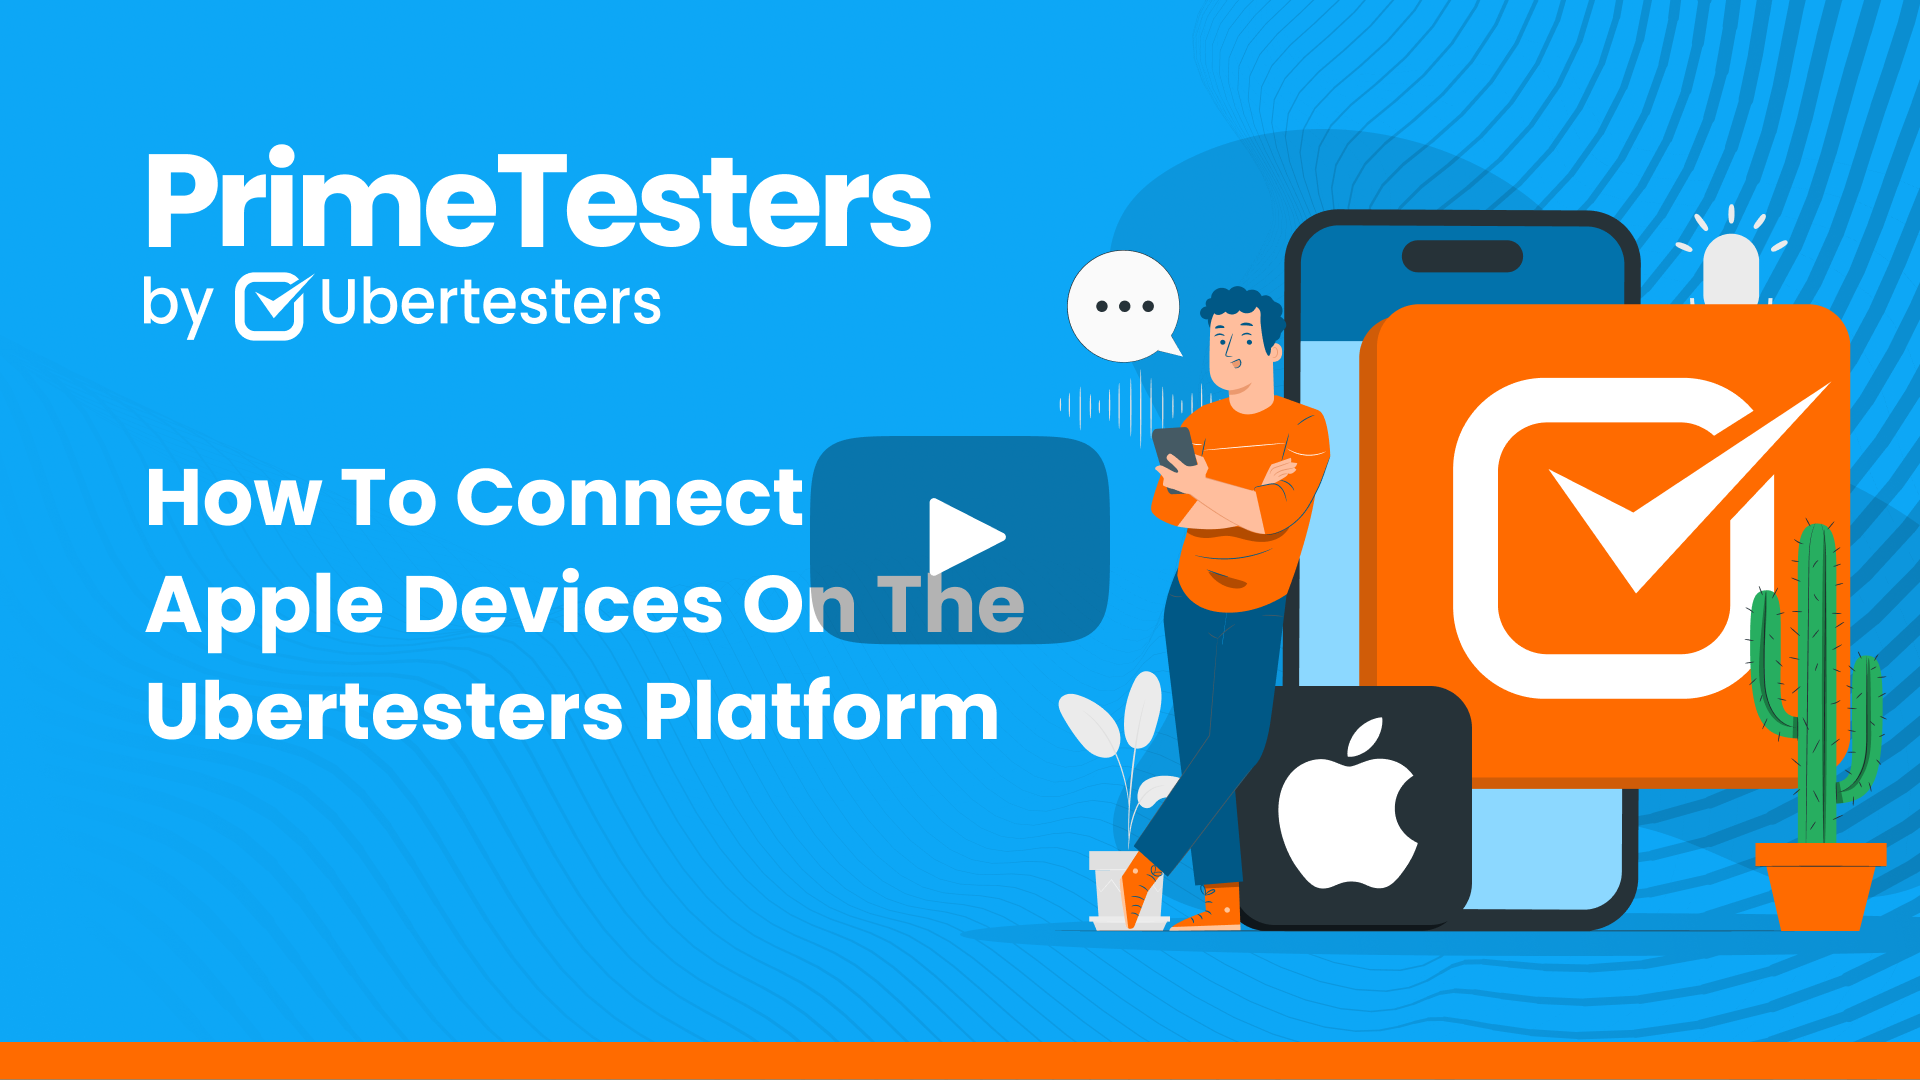 How To Connect Apple Devices On The Ubertesters Platform